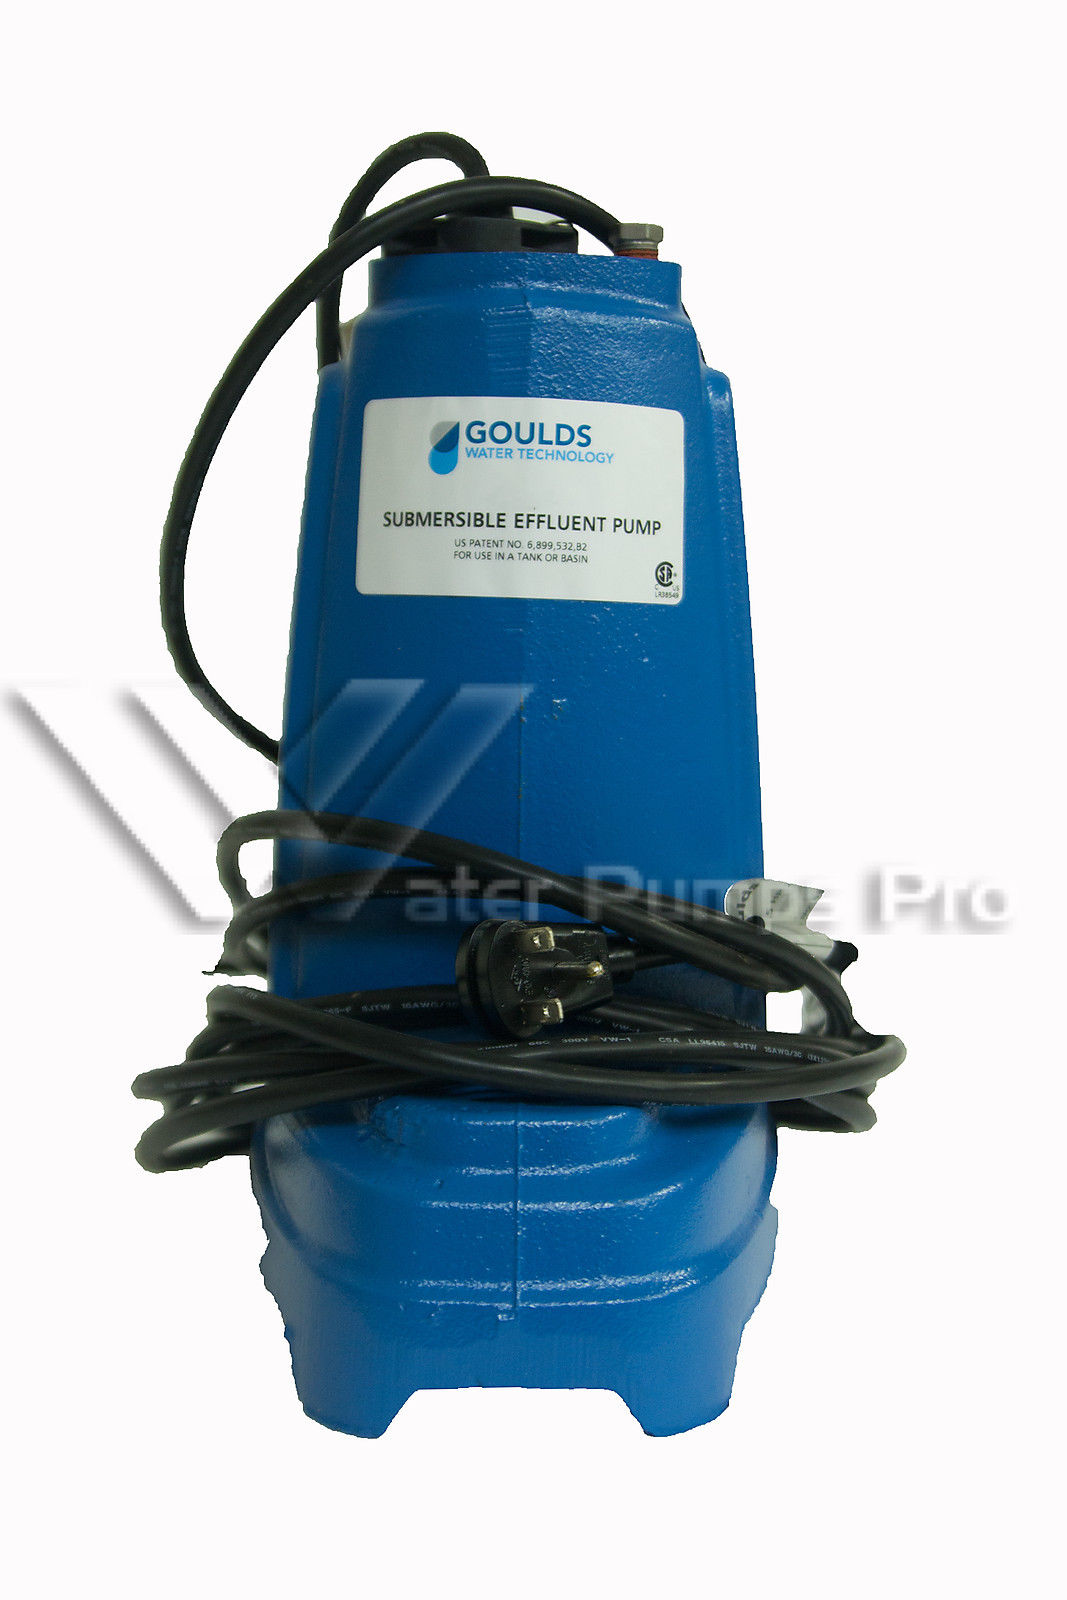 Goulds PE51M 1/2HP, 115V Submersible Effluent Pump - Click Image to Close